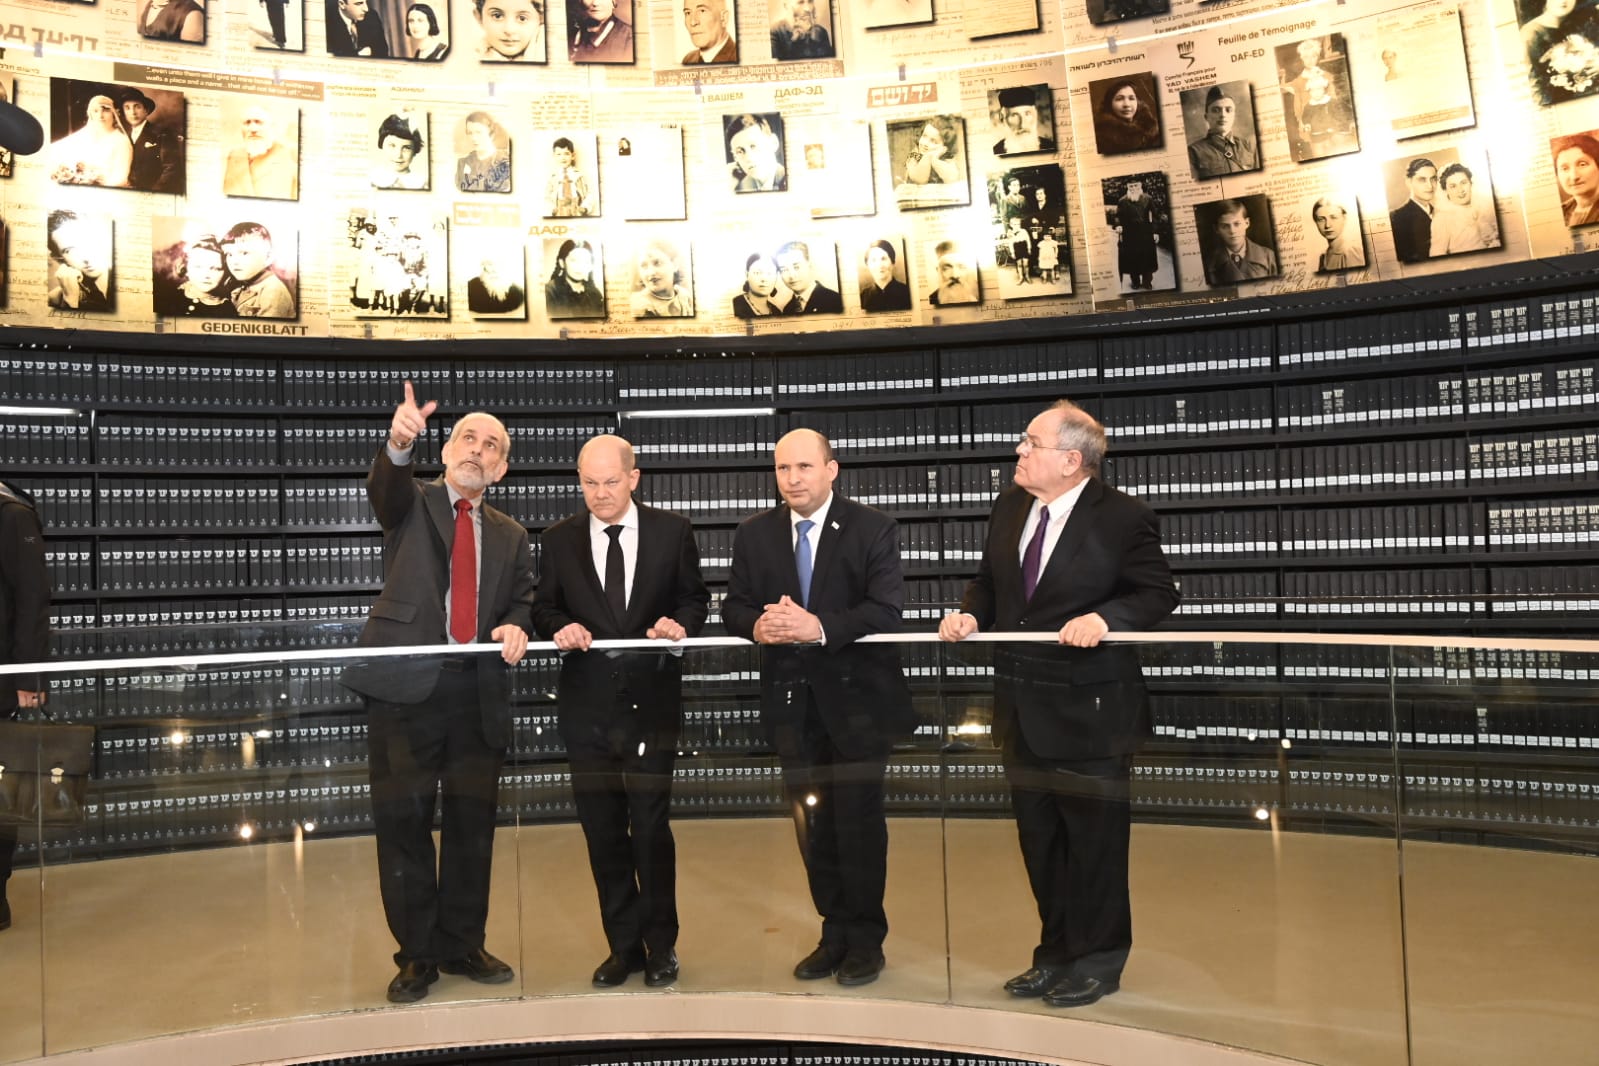 Chancellor Scholz, Prime Minister Bennett and Chairman Dani Dayan in the Hall of Names towards the end of the Holocaust History Museum